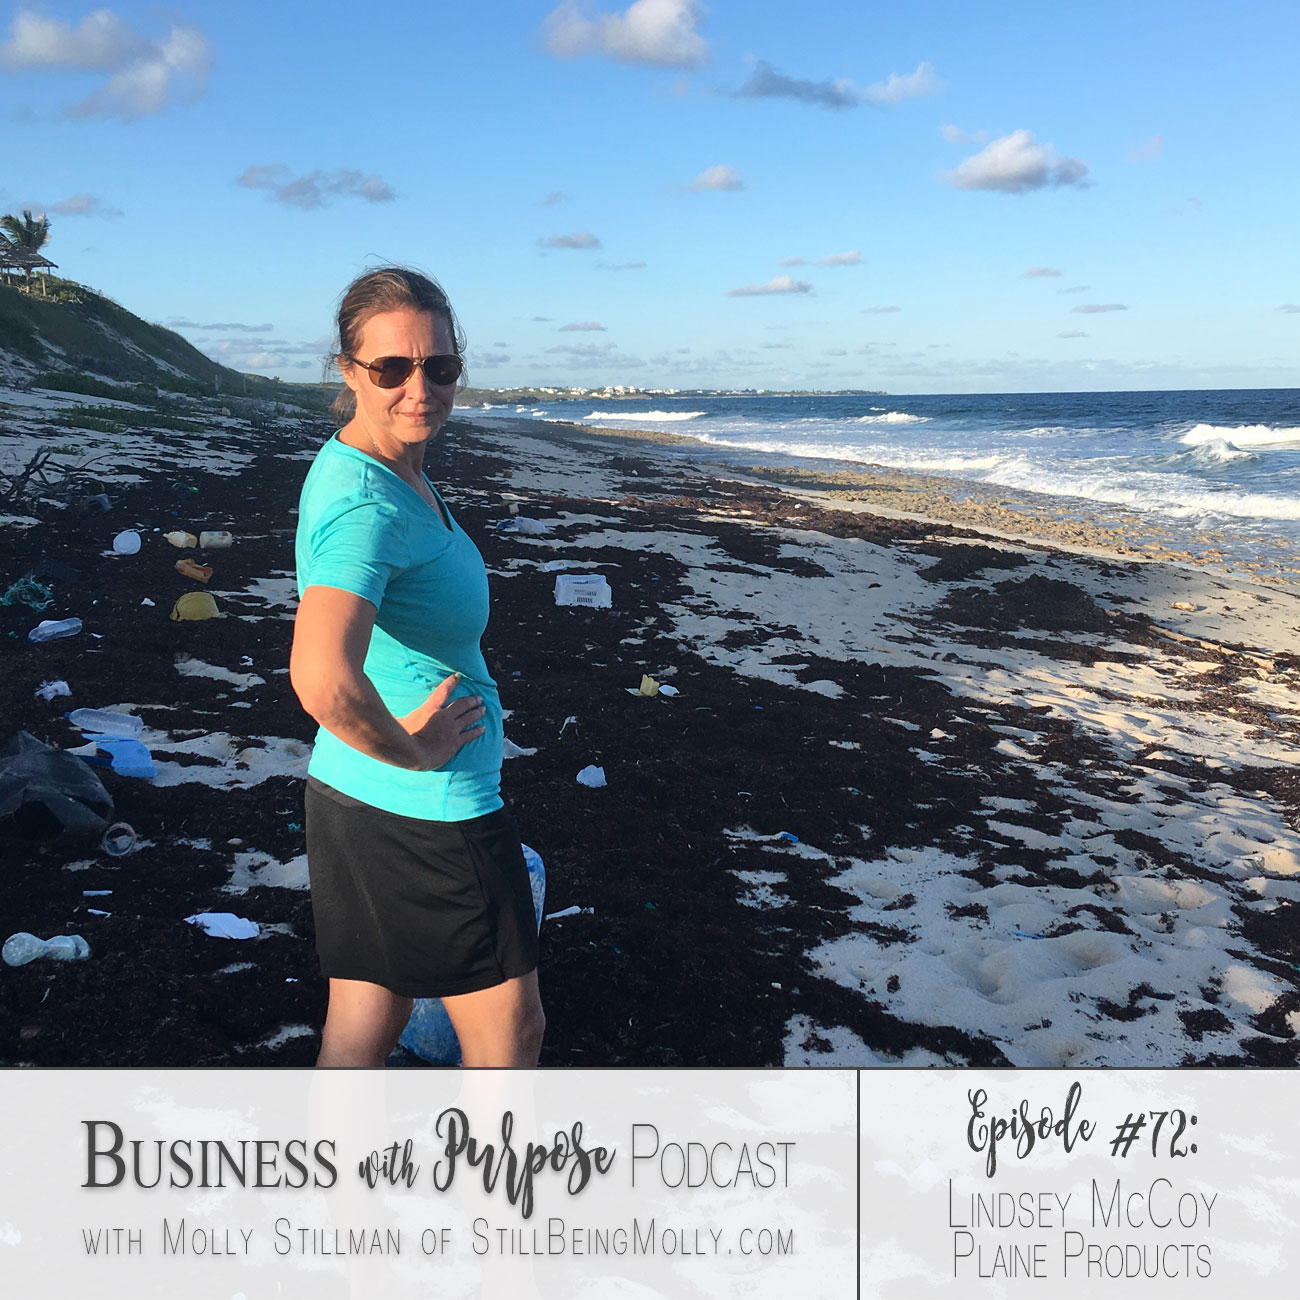 Business with Purpose Podcast EP 72: Lindsey McCoy, Founder of Plaine Products by popular North Carolina ethical fashion blogger Still Being Molly